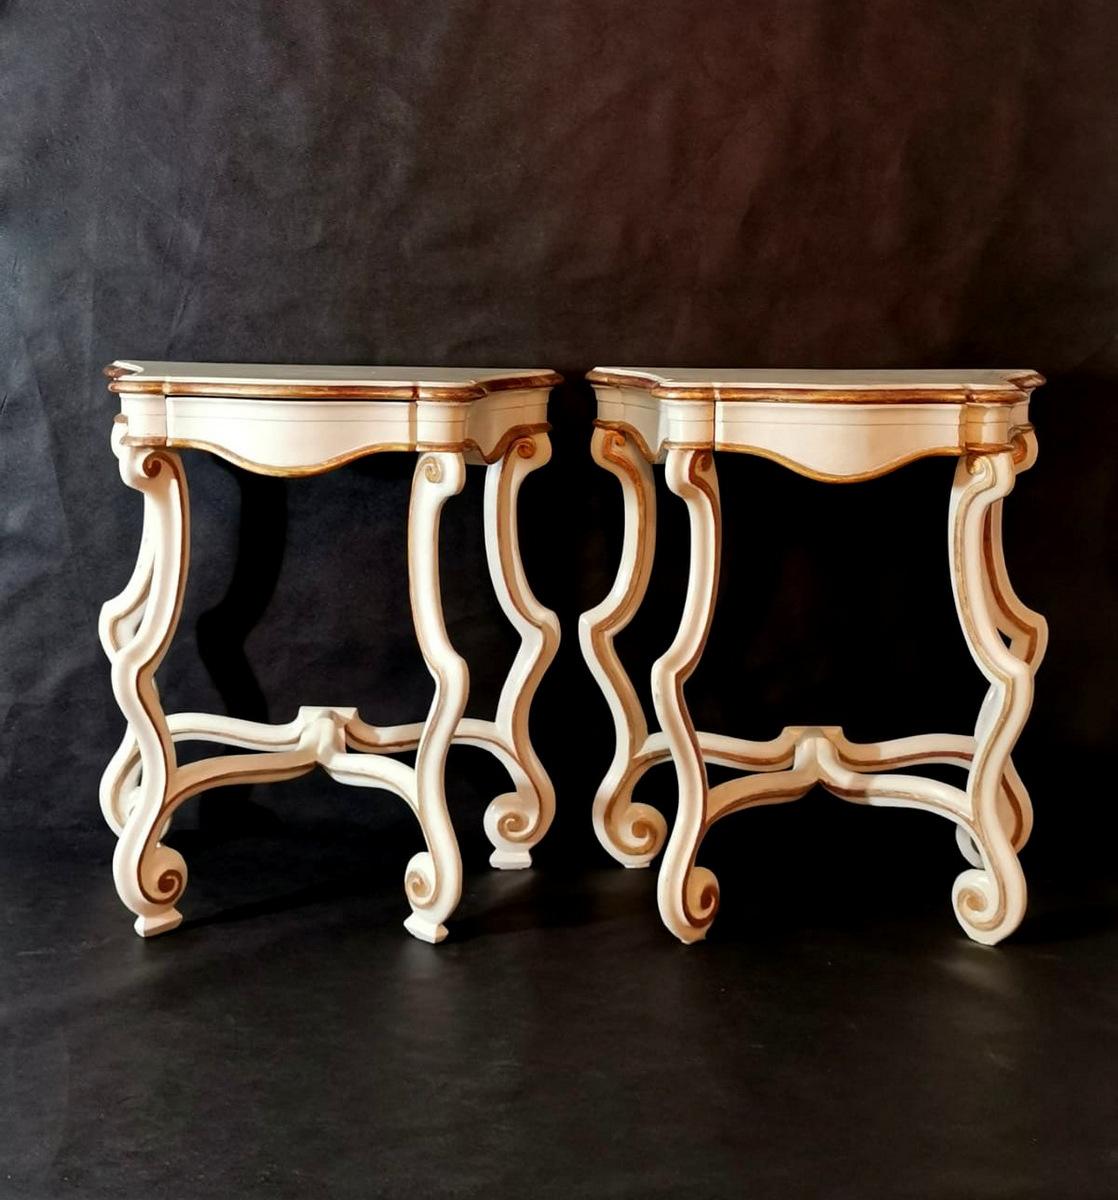  Pair of consoles or bedside tables in white lacquered wood with gold leaf finish; the two pieces of furniture have a graceful and light design, with soft and elegant curves in pure Rococo style; the application of the gold leaf technique along the